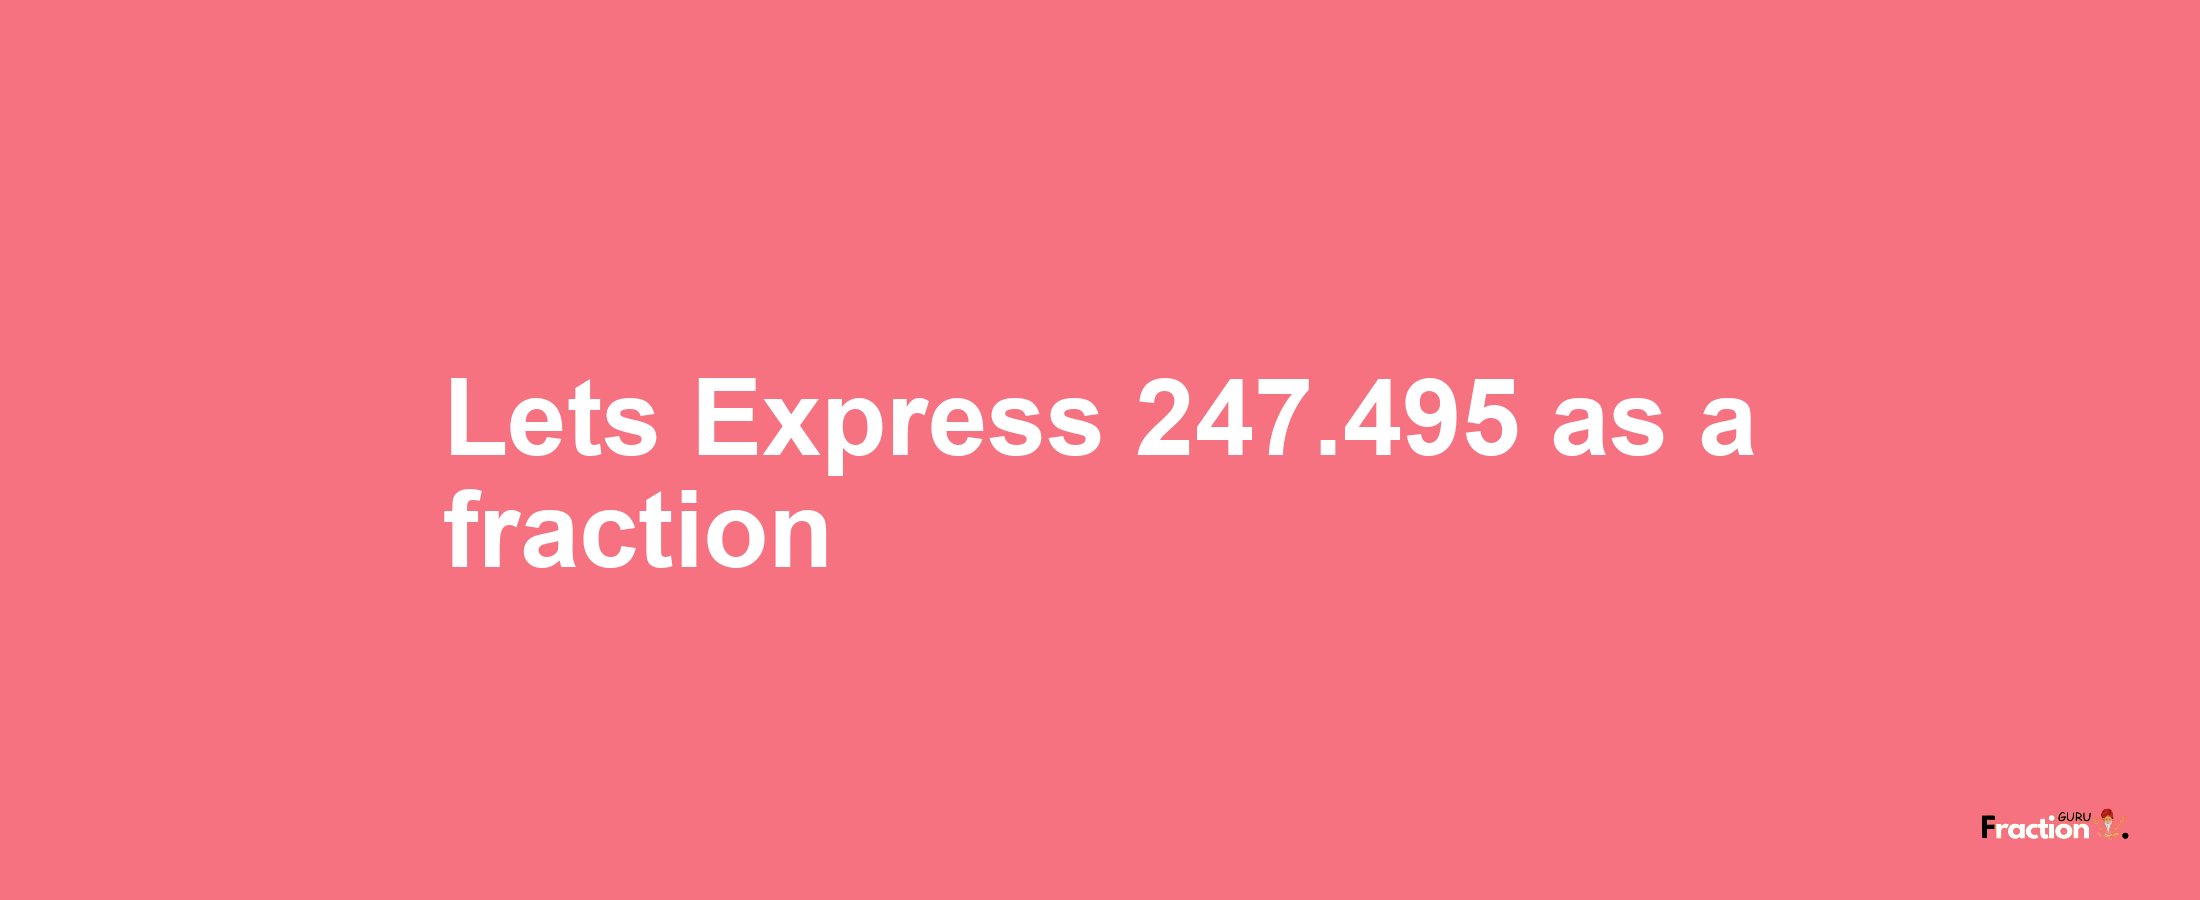 Lets Express 247.495 as afraction